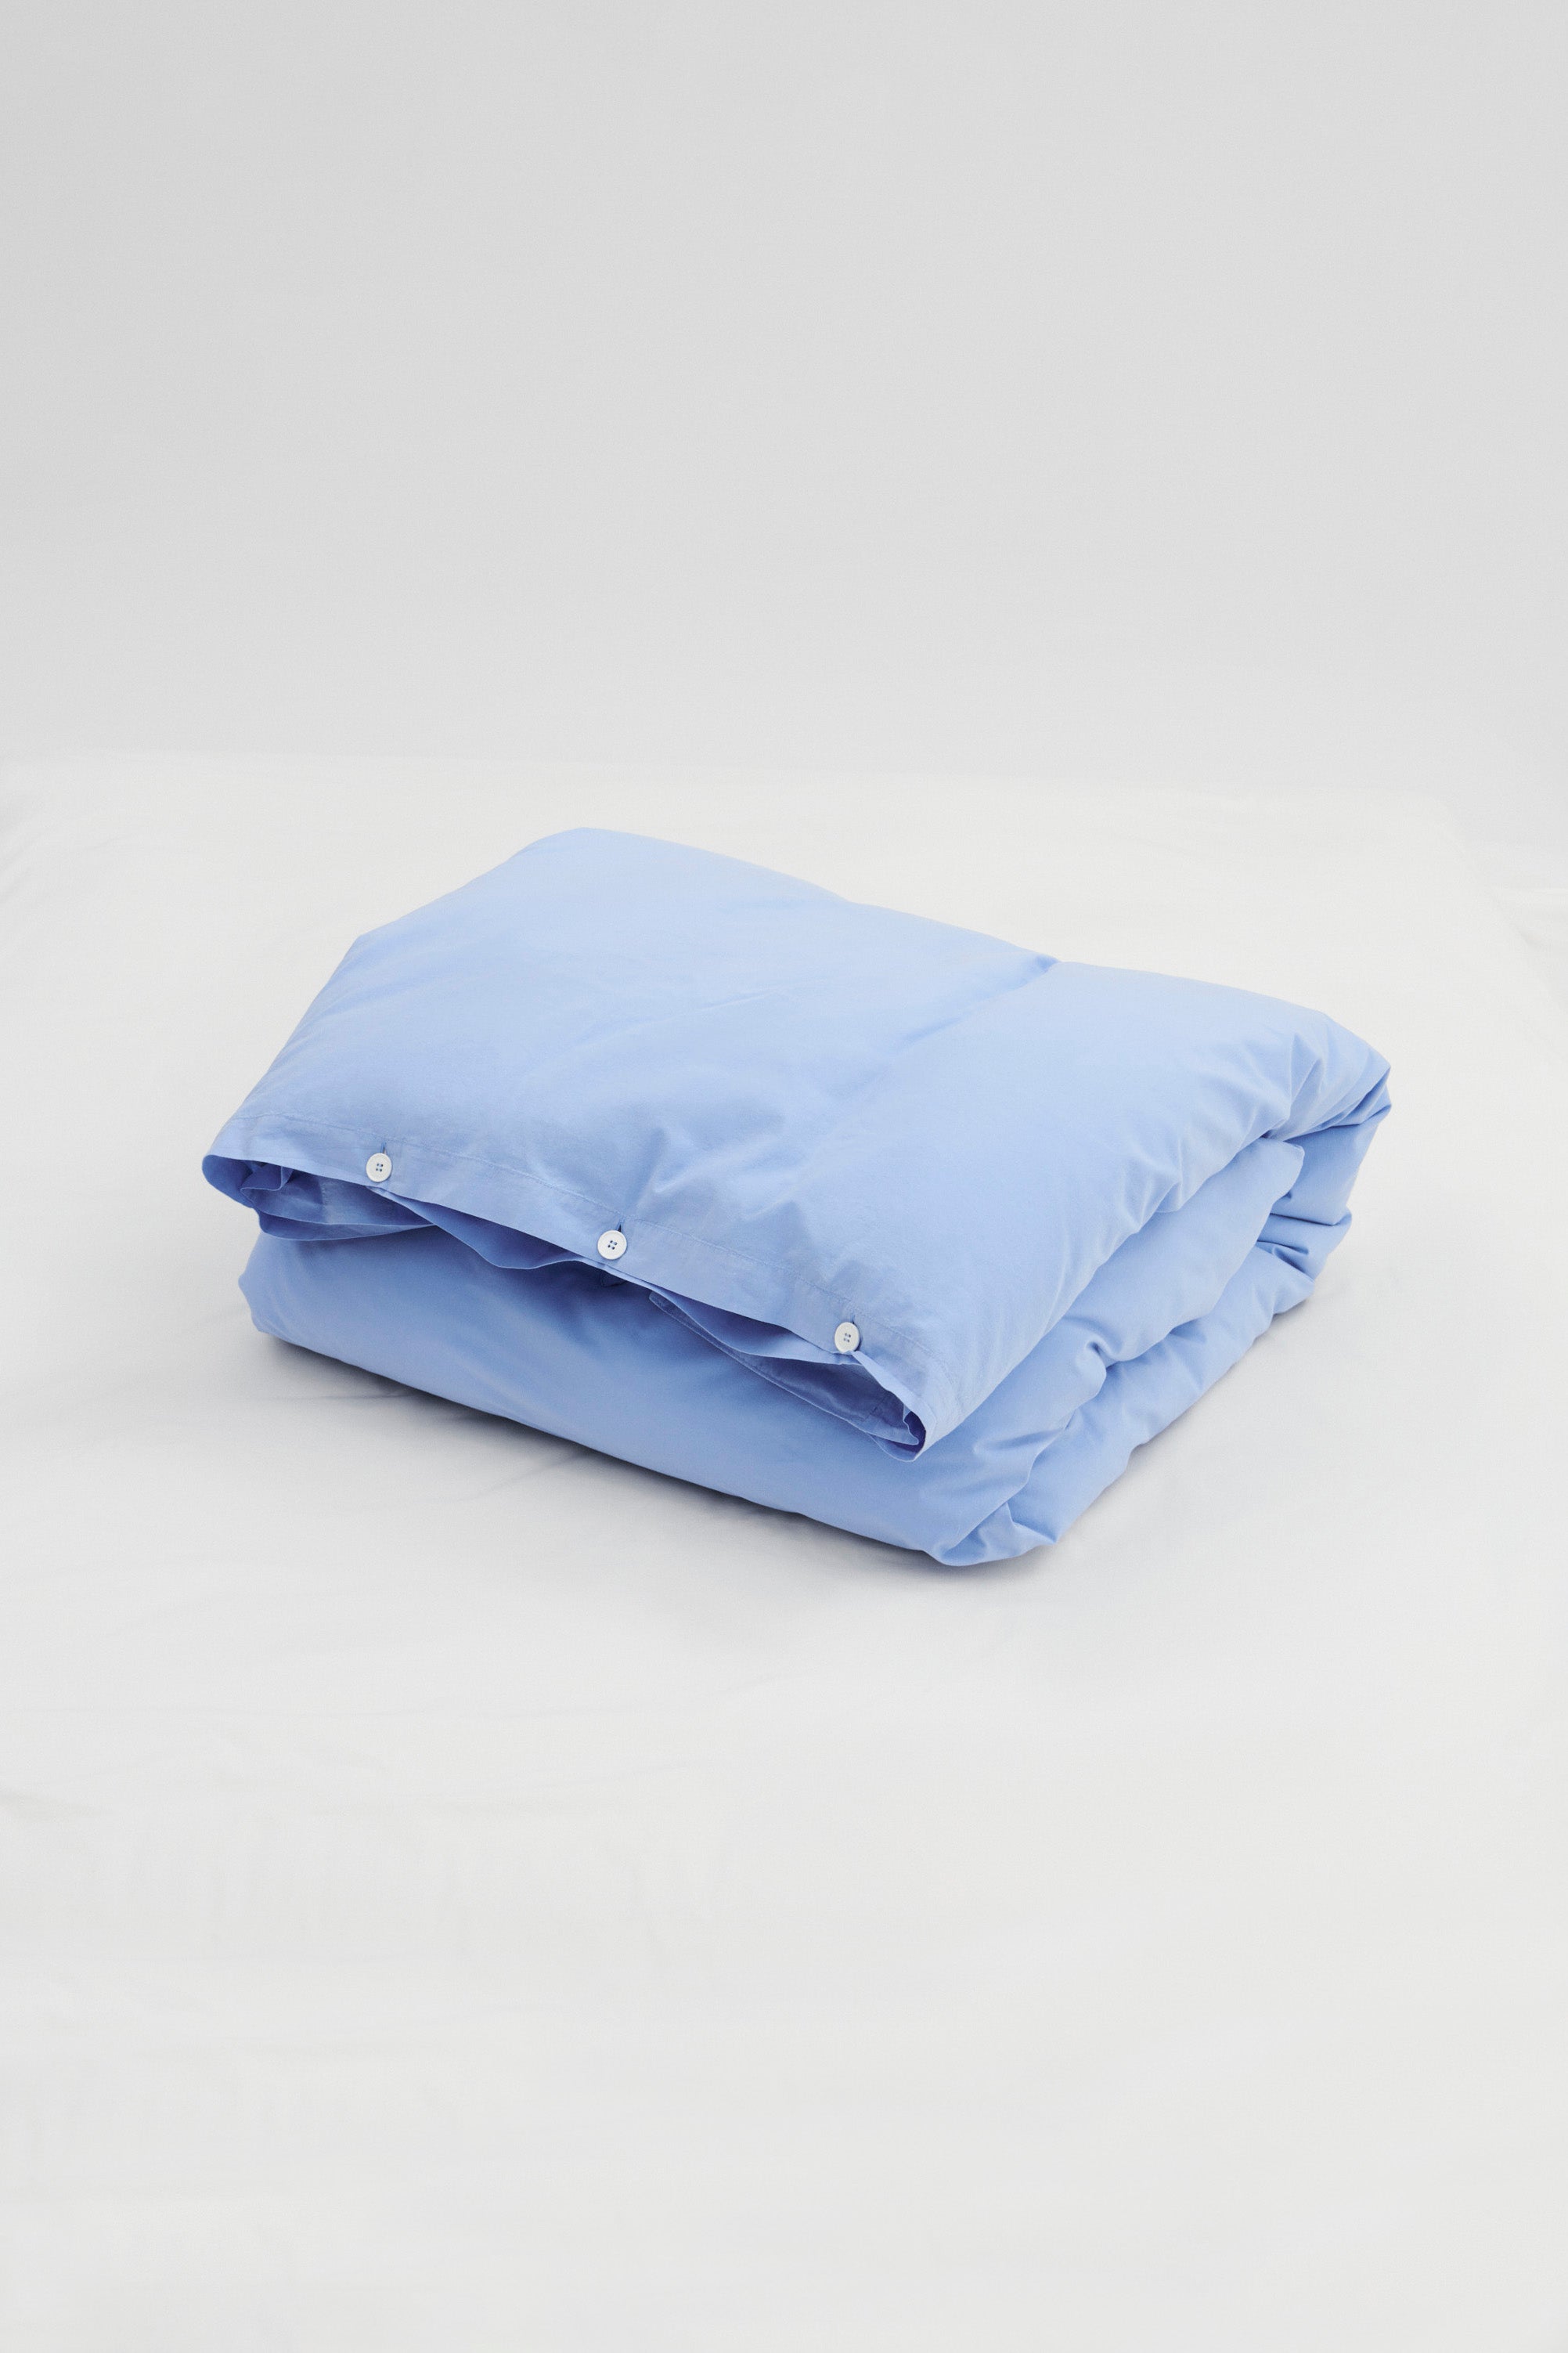 Percale Double Duvet Cover Island Blue